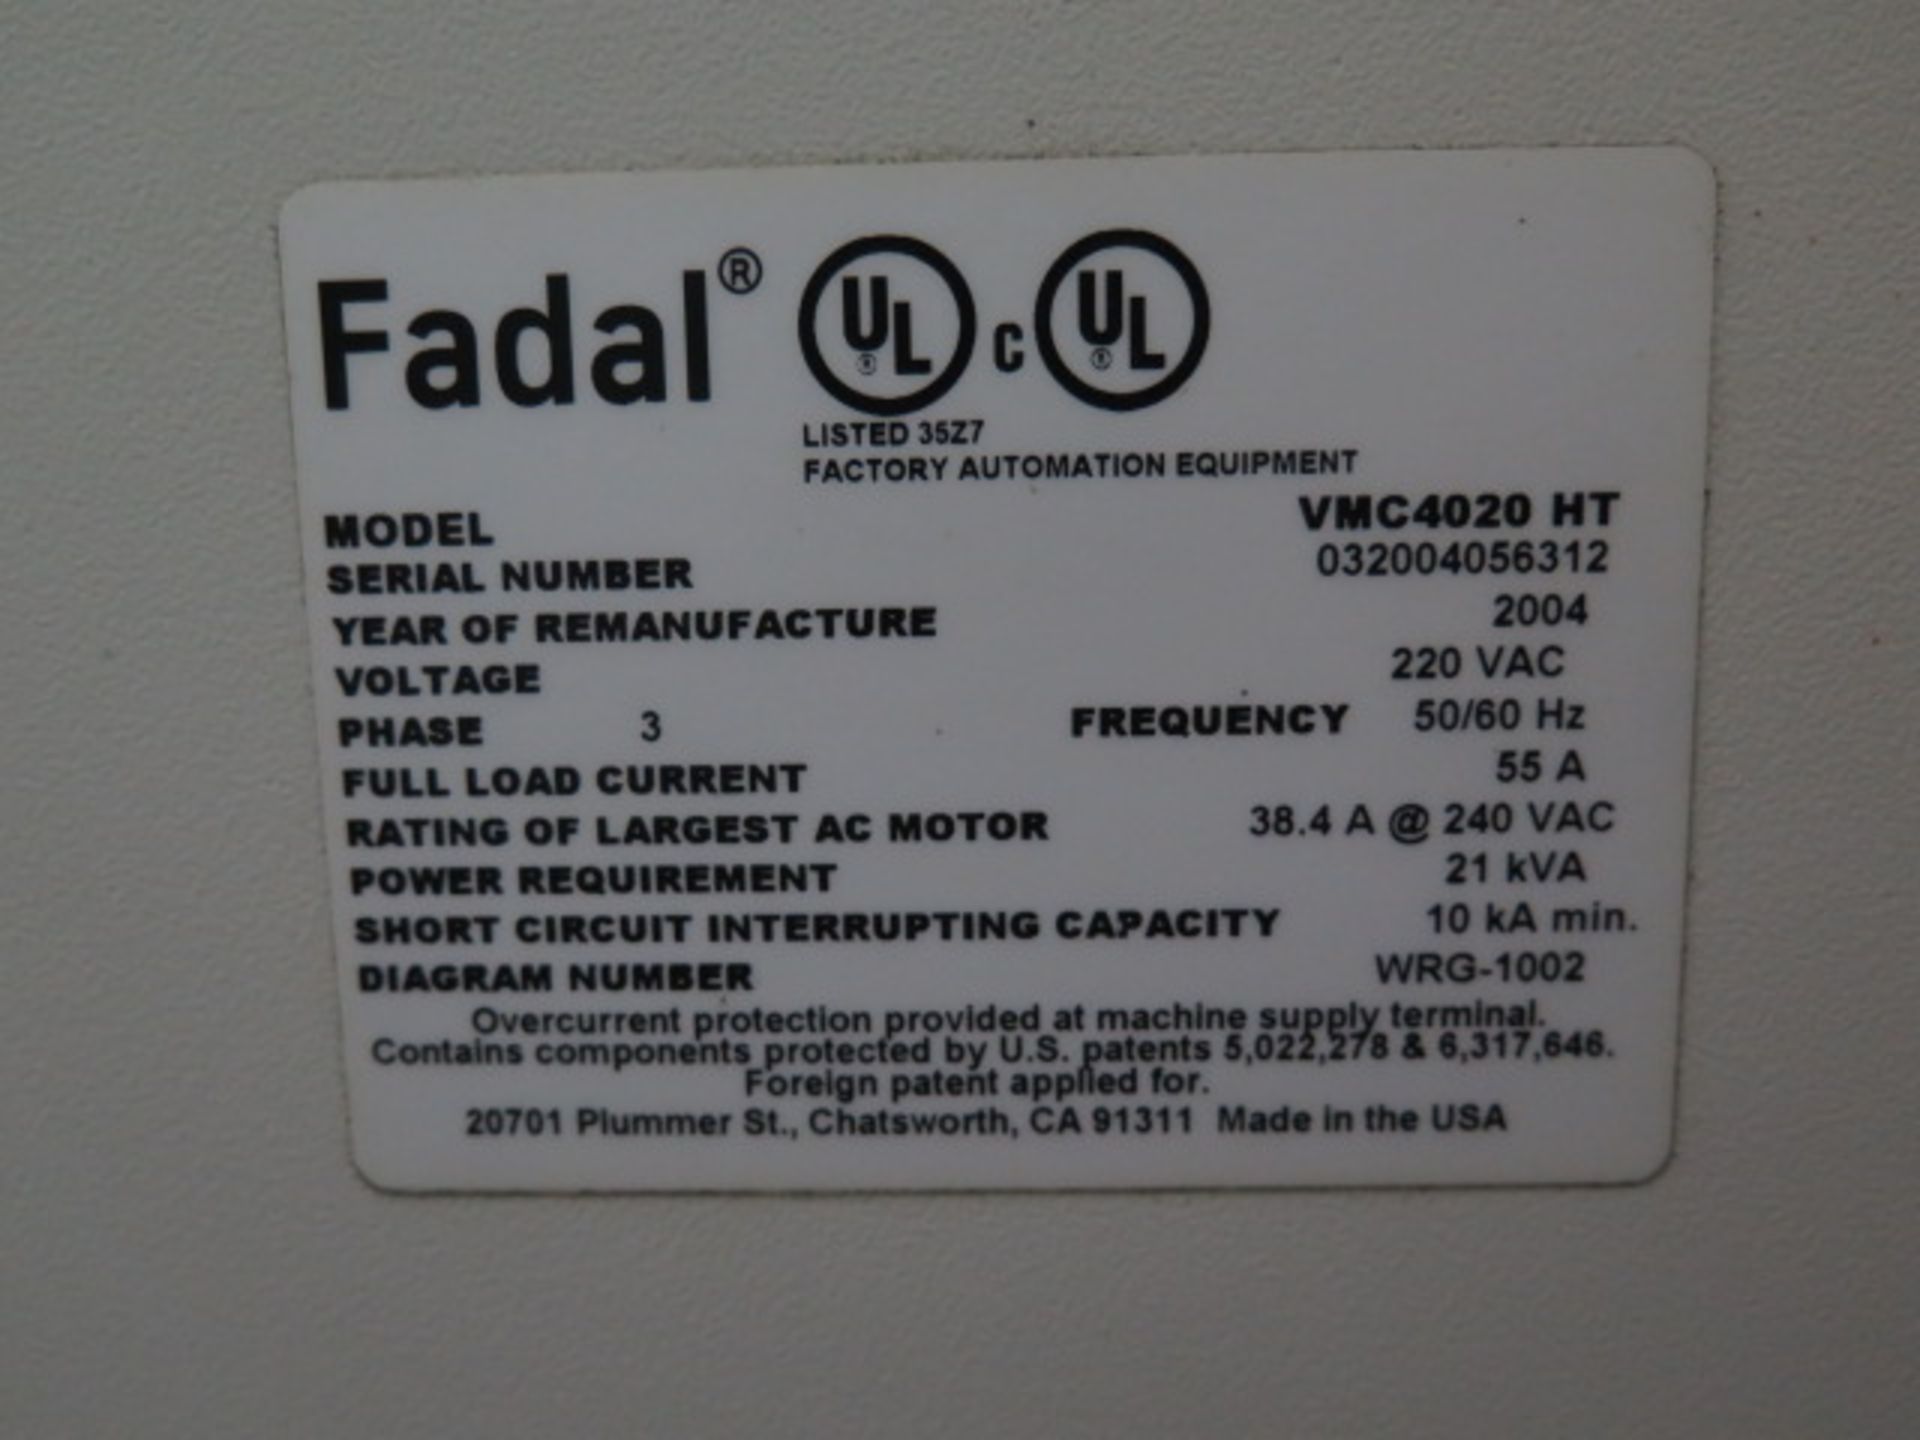 2004 Fadal VMC4020HT 4-Axis CNC Vertical Machining Center s/n 032004056312 w/ Fadal Multiprocessor - Image 13 of 13